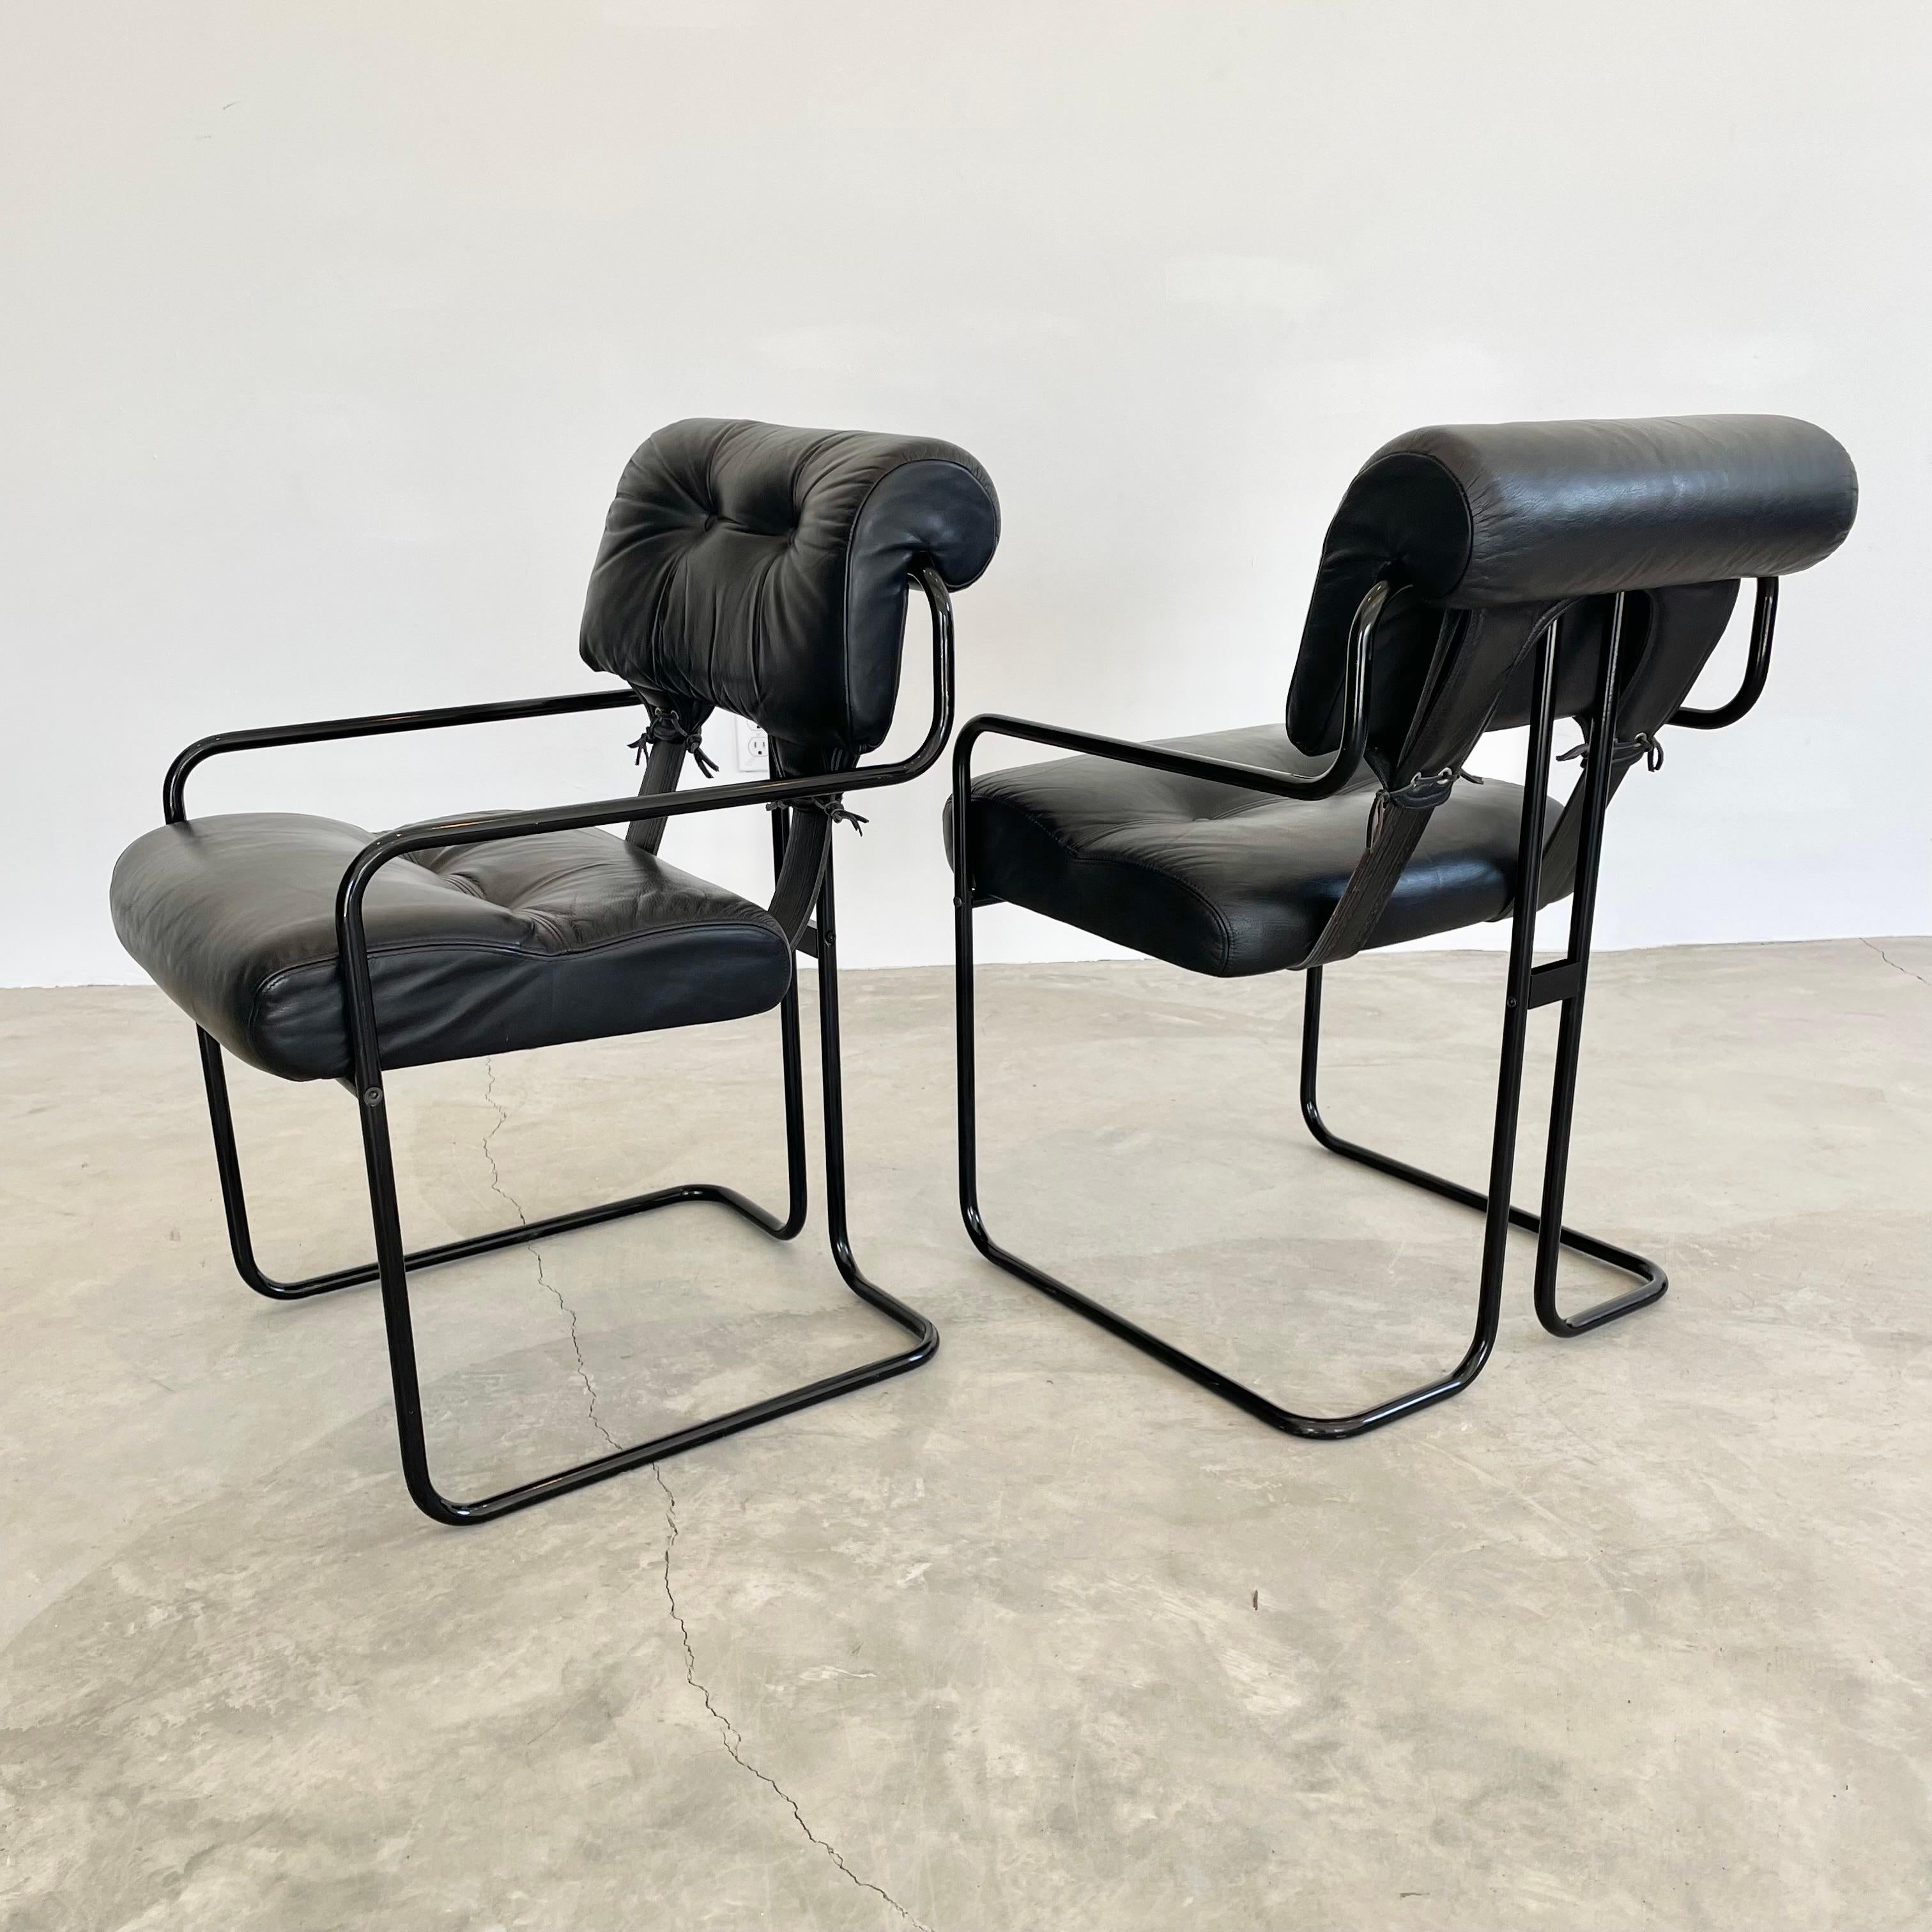 Guido Faleschini Tucroma Dining Chairs in Black Leather for Mariani, 1980s Italy For Sale 8